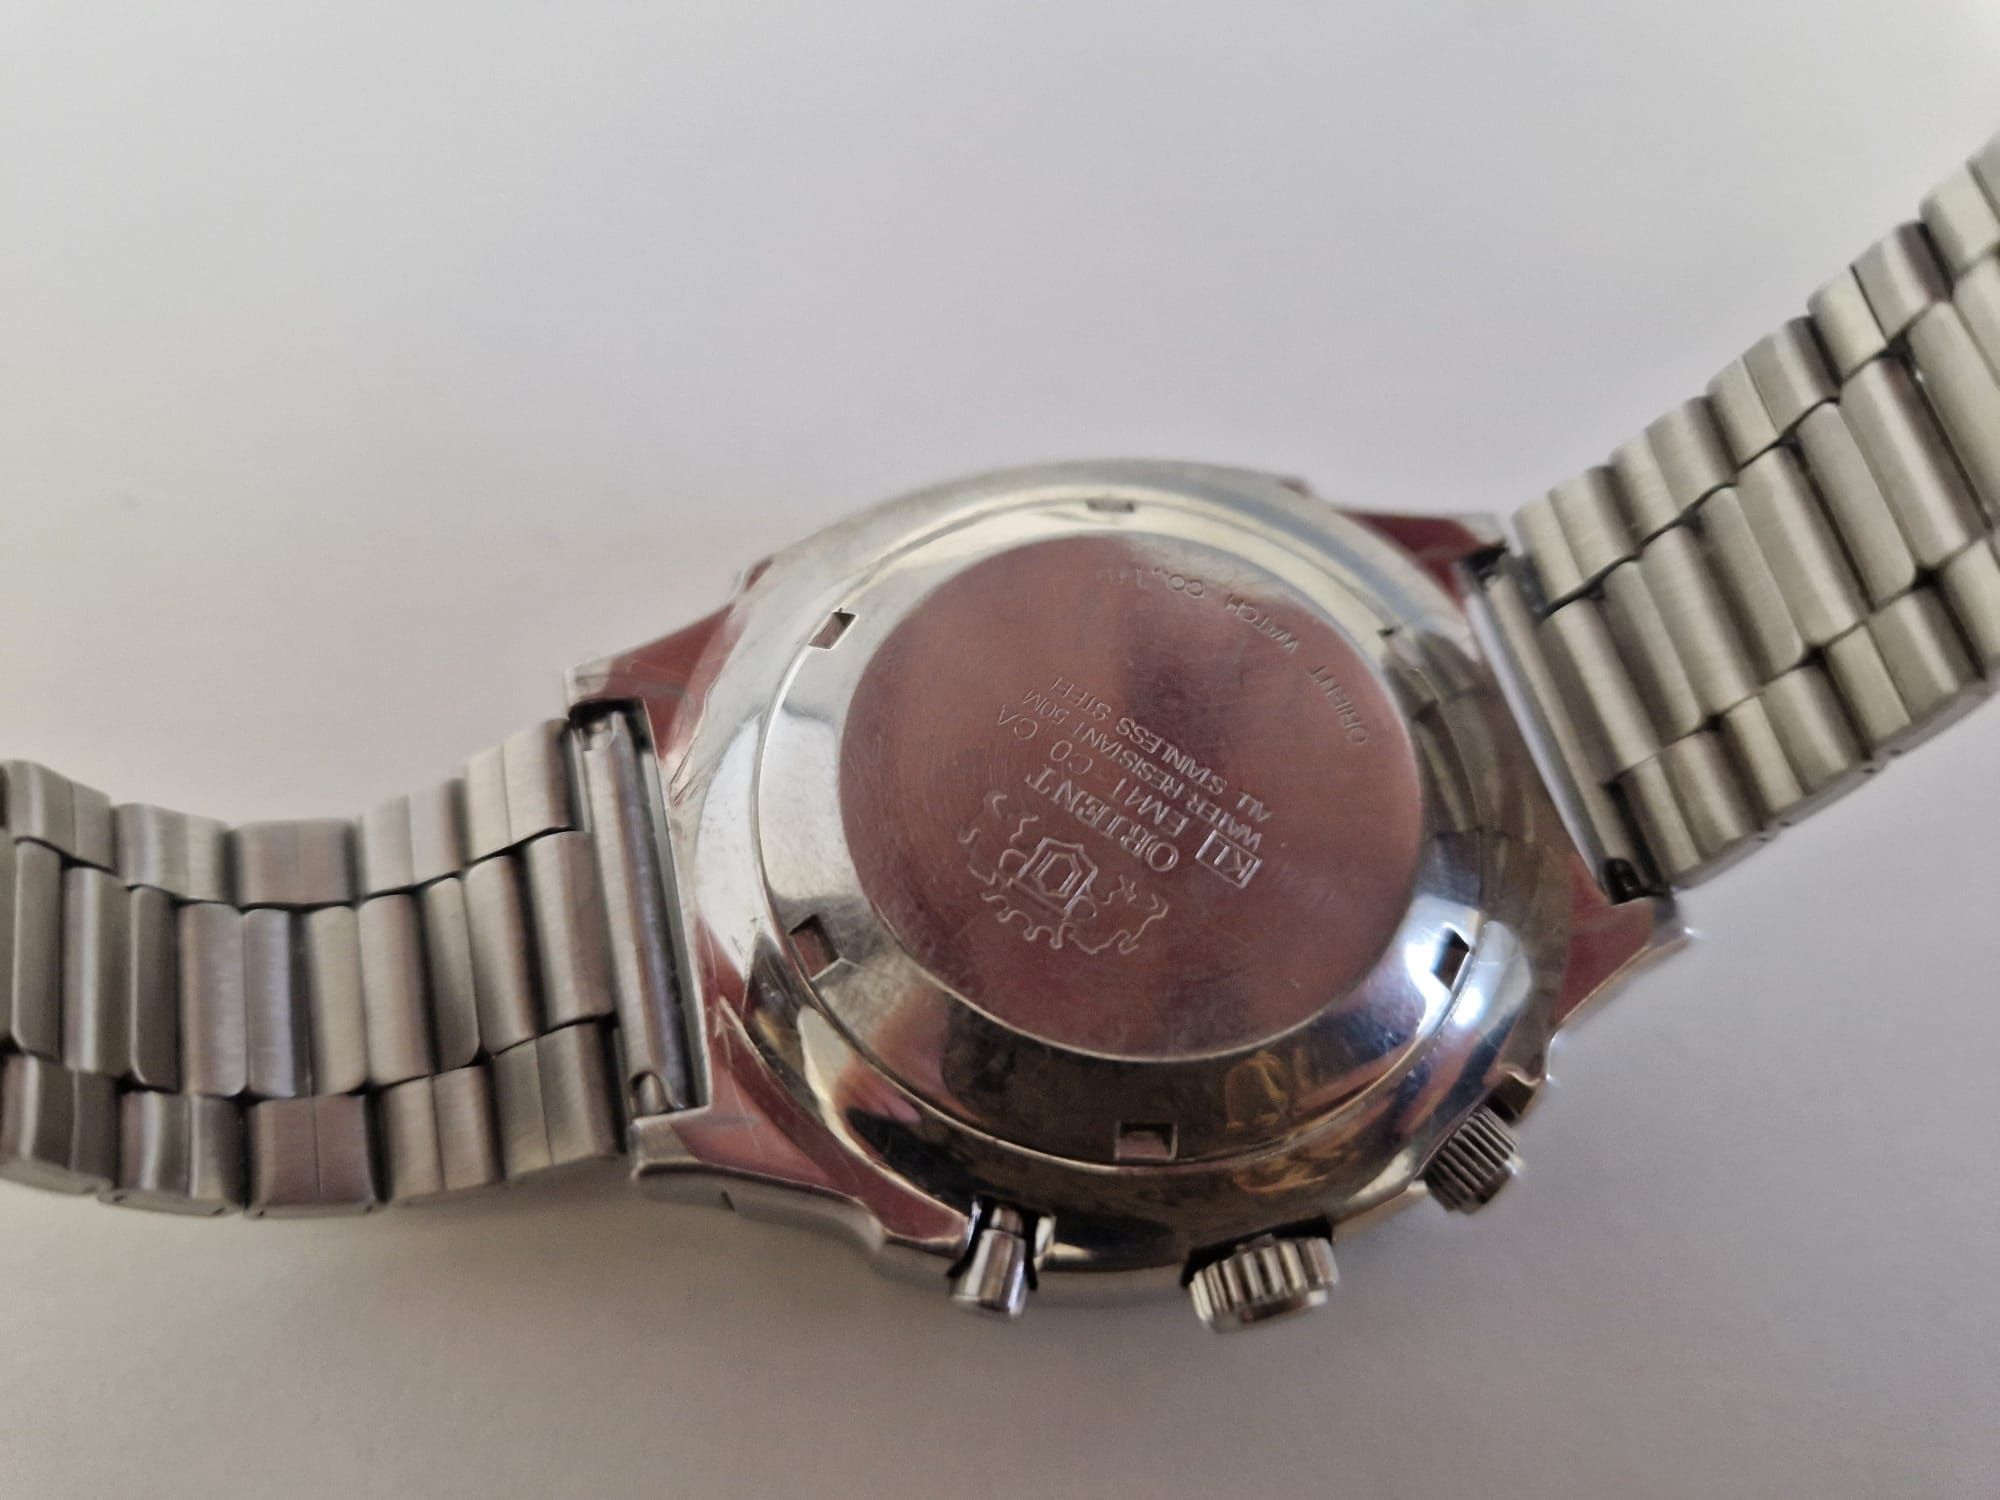 Orient SK Crystal, lata 70